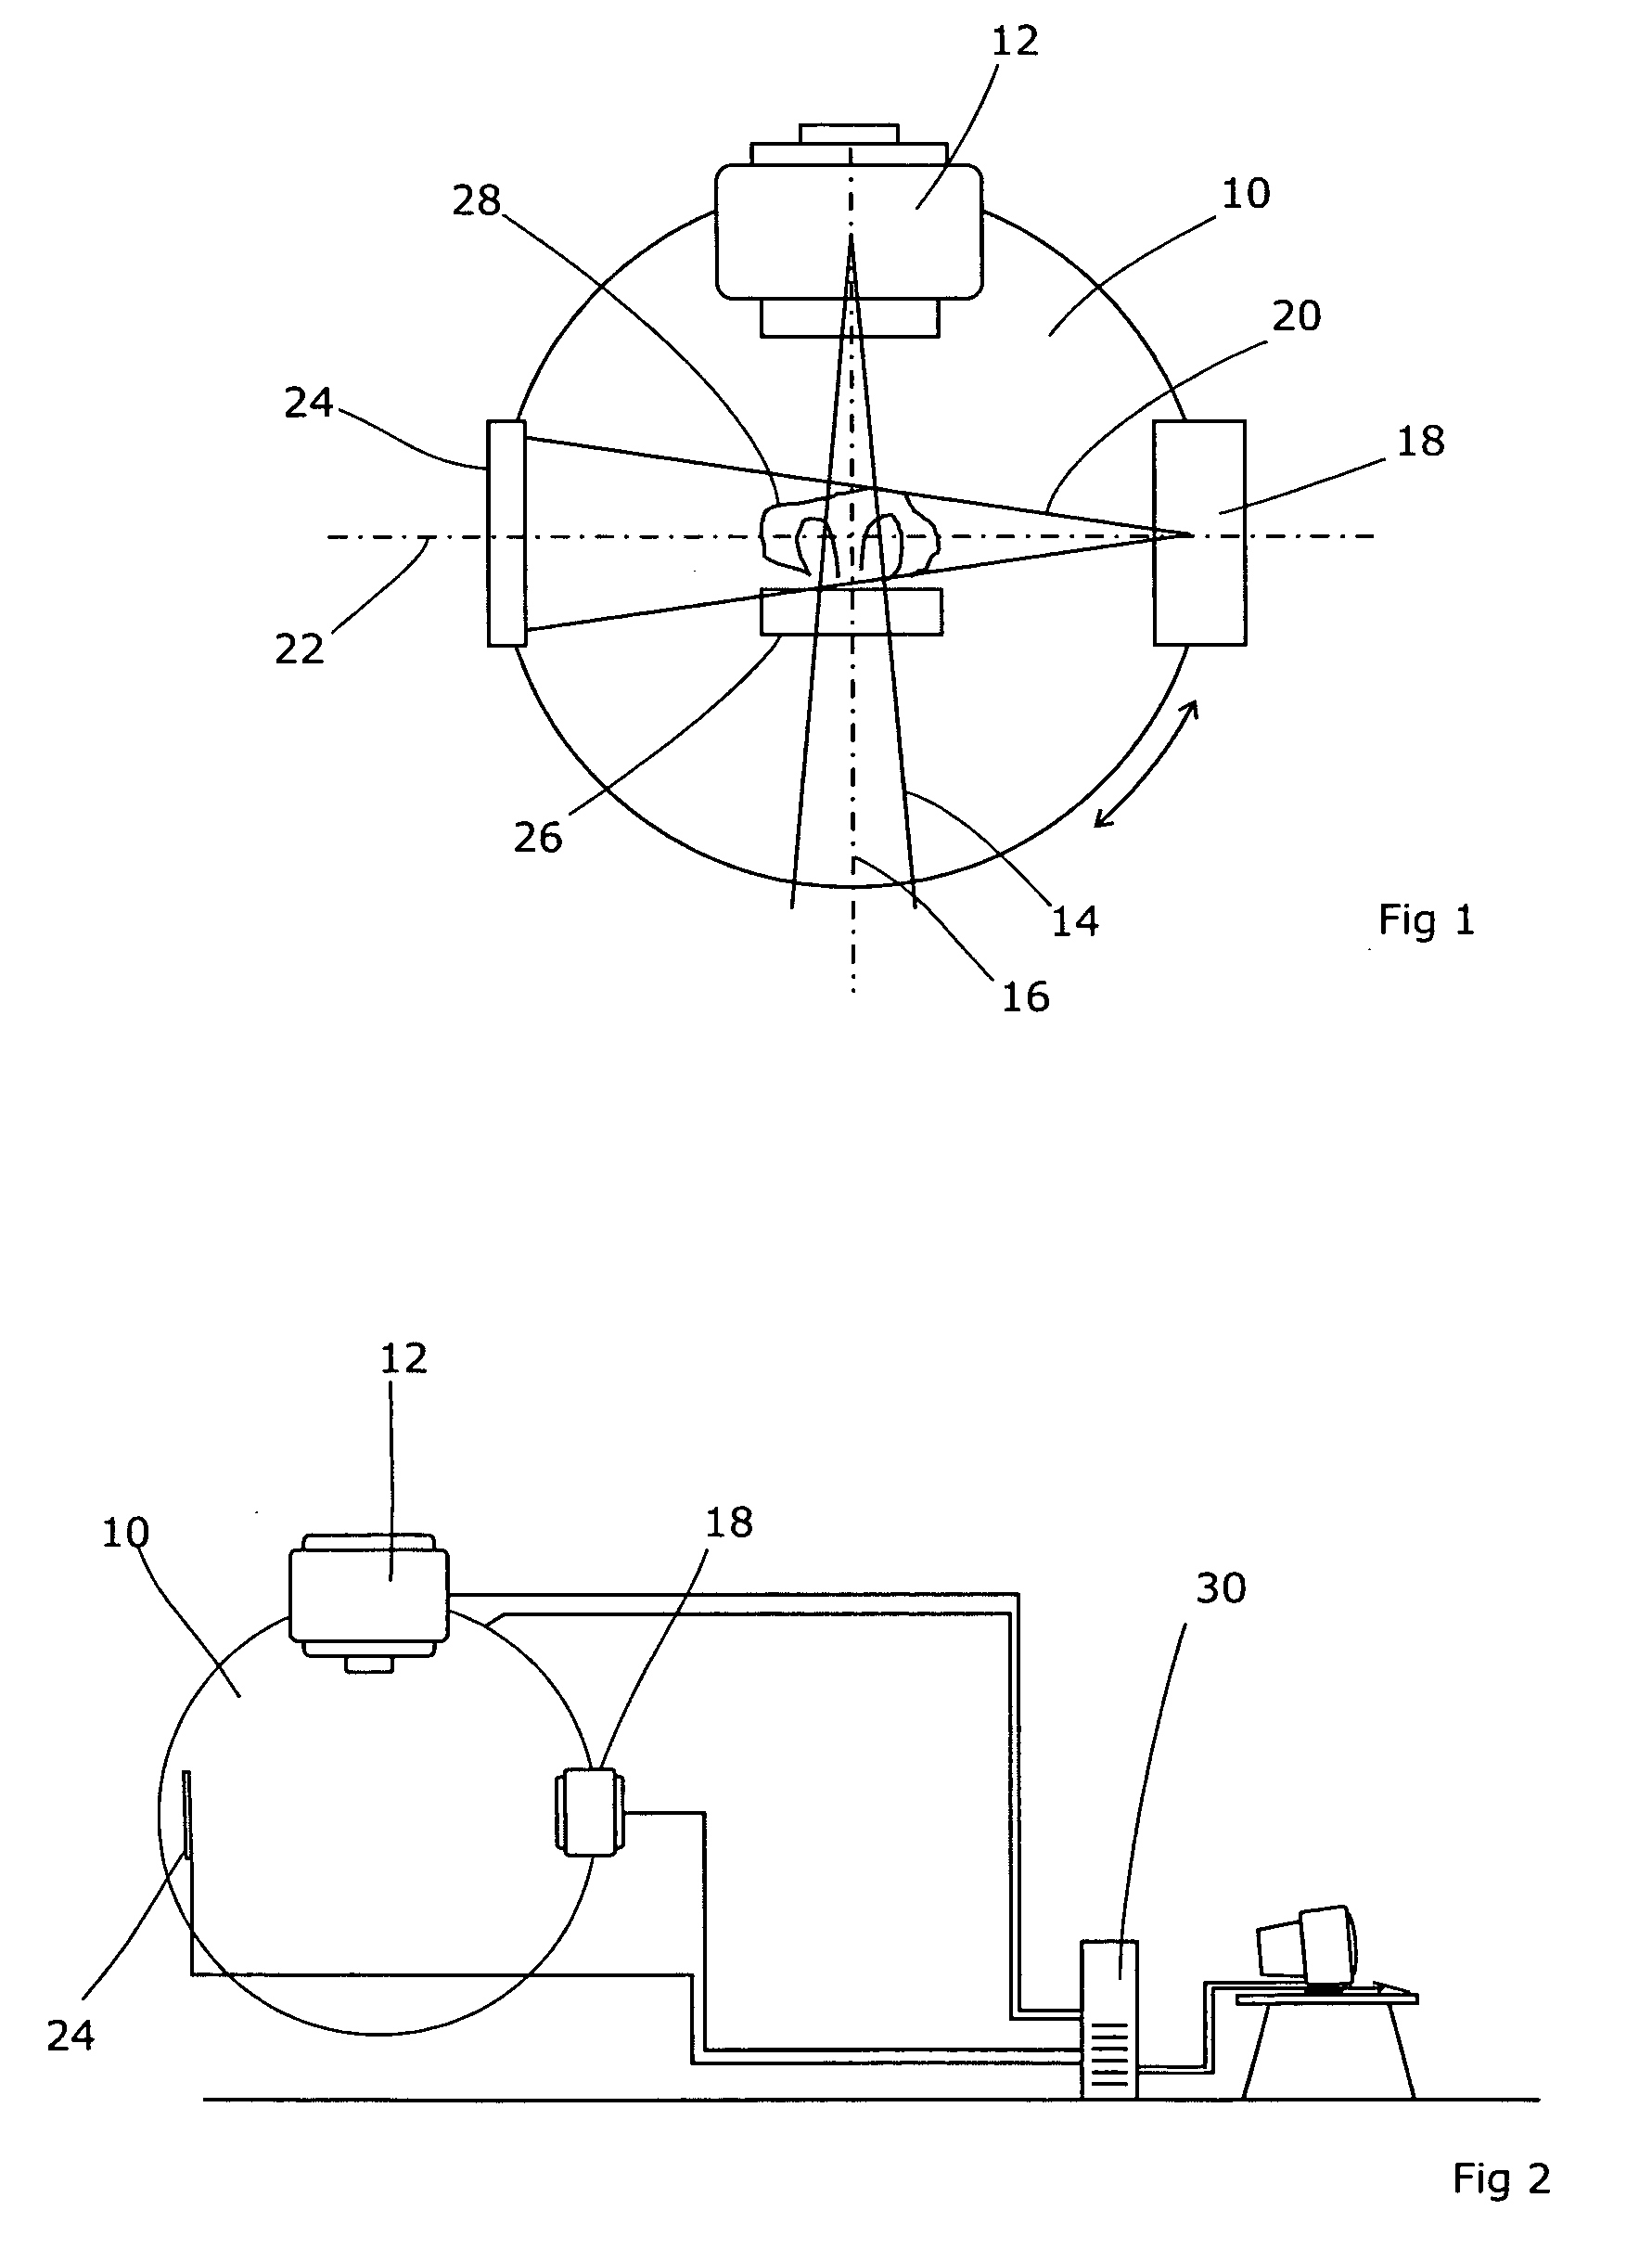 Therapeutic use of radiation and apparatus therefor